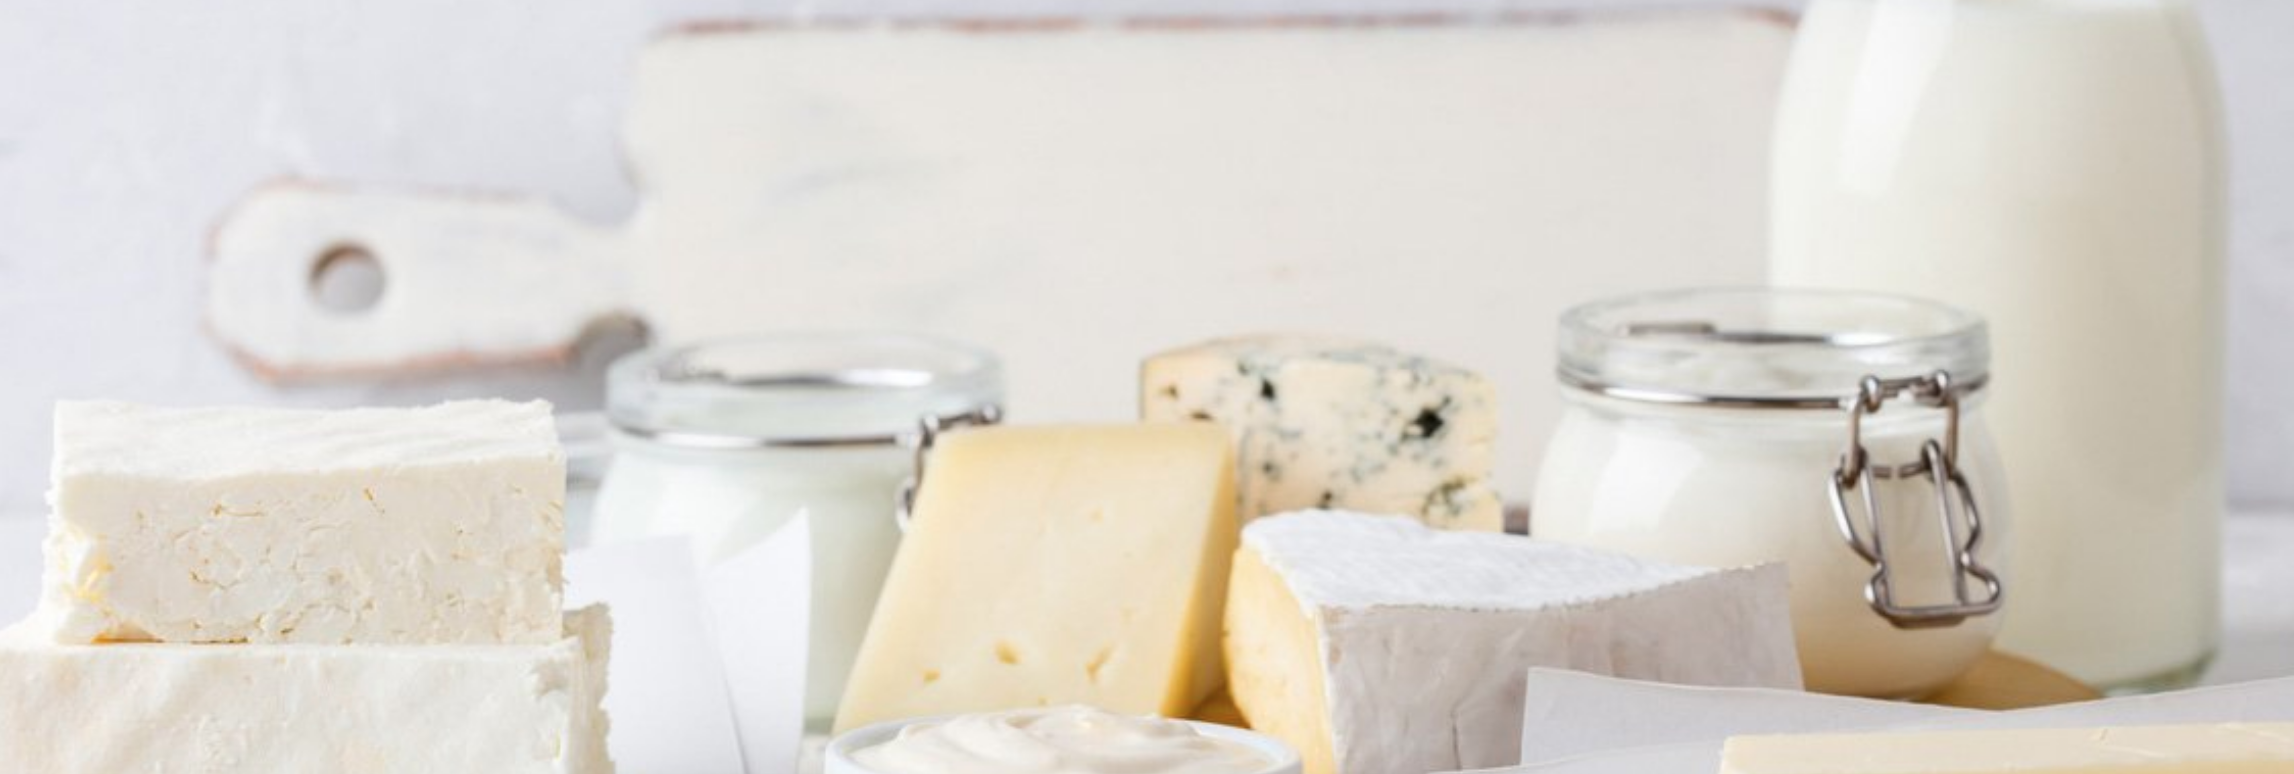 Sticking to low-fat dairy may not be the only heart healthy option, study shows